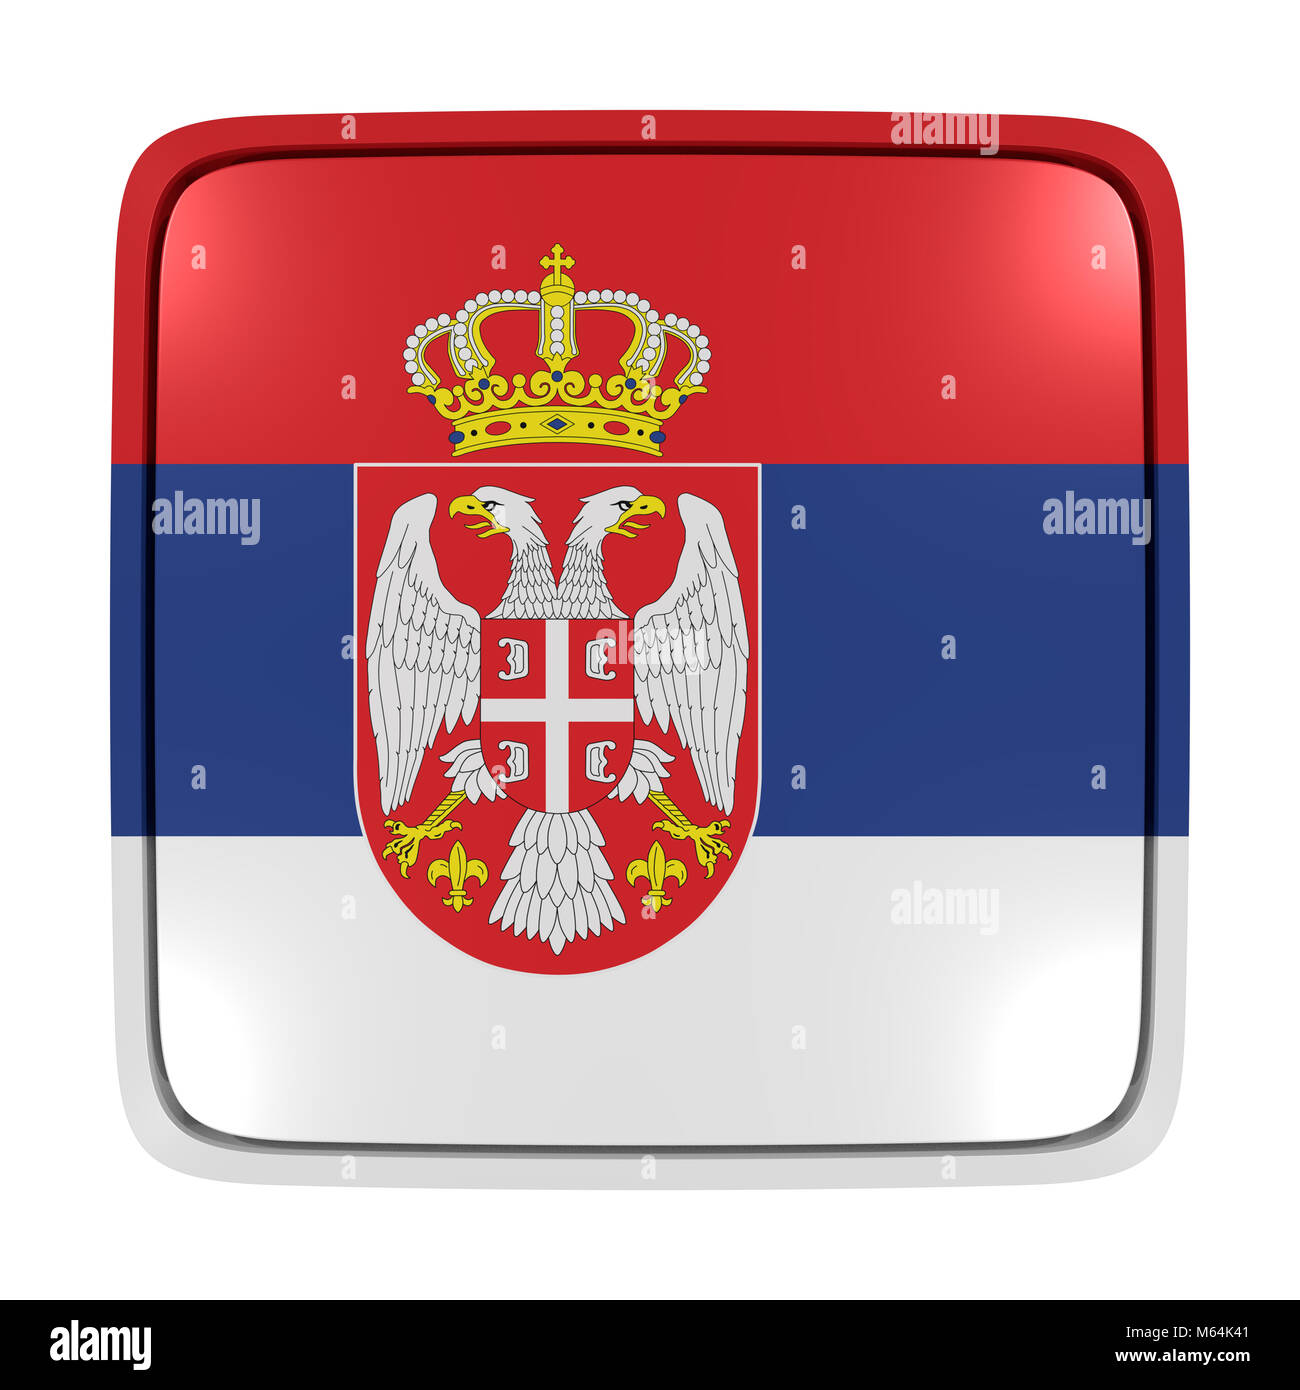 3d rendering of a Serbia flag icon. Isolated on white background. Stock Photo